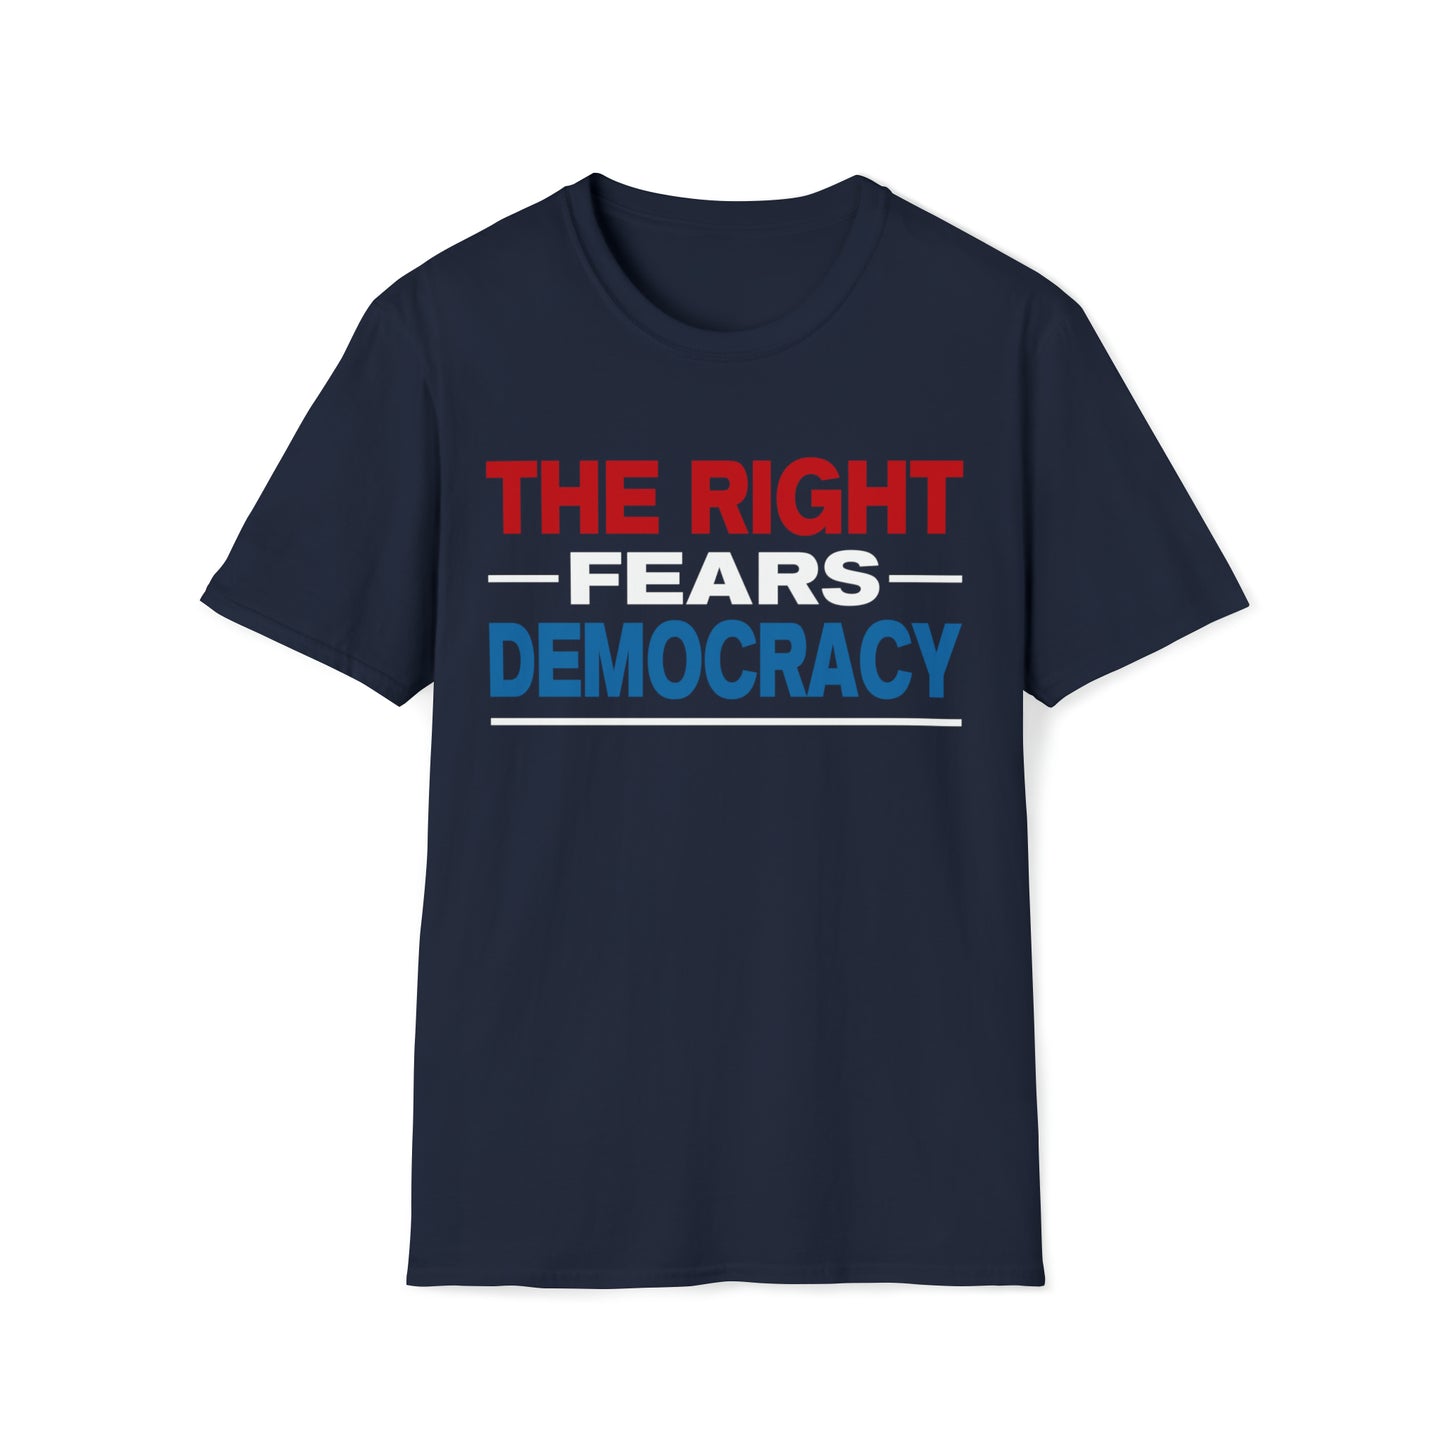 The Right Fears Democracy Tee